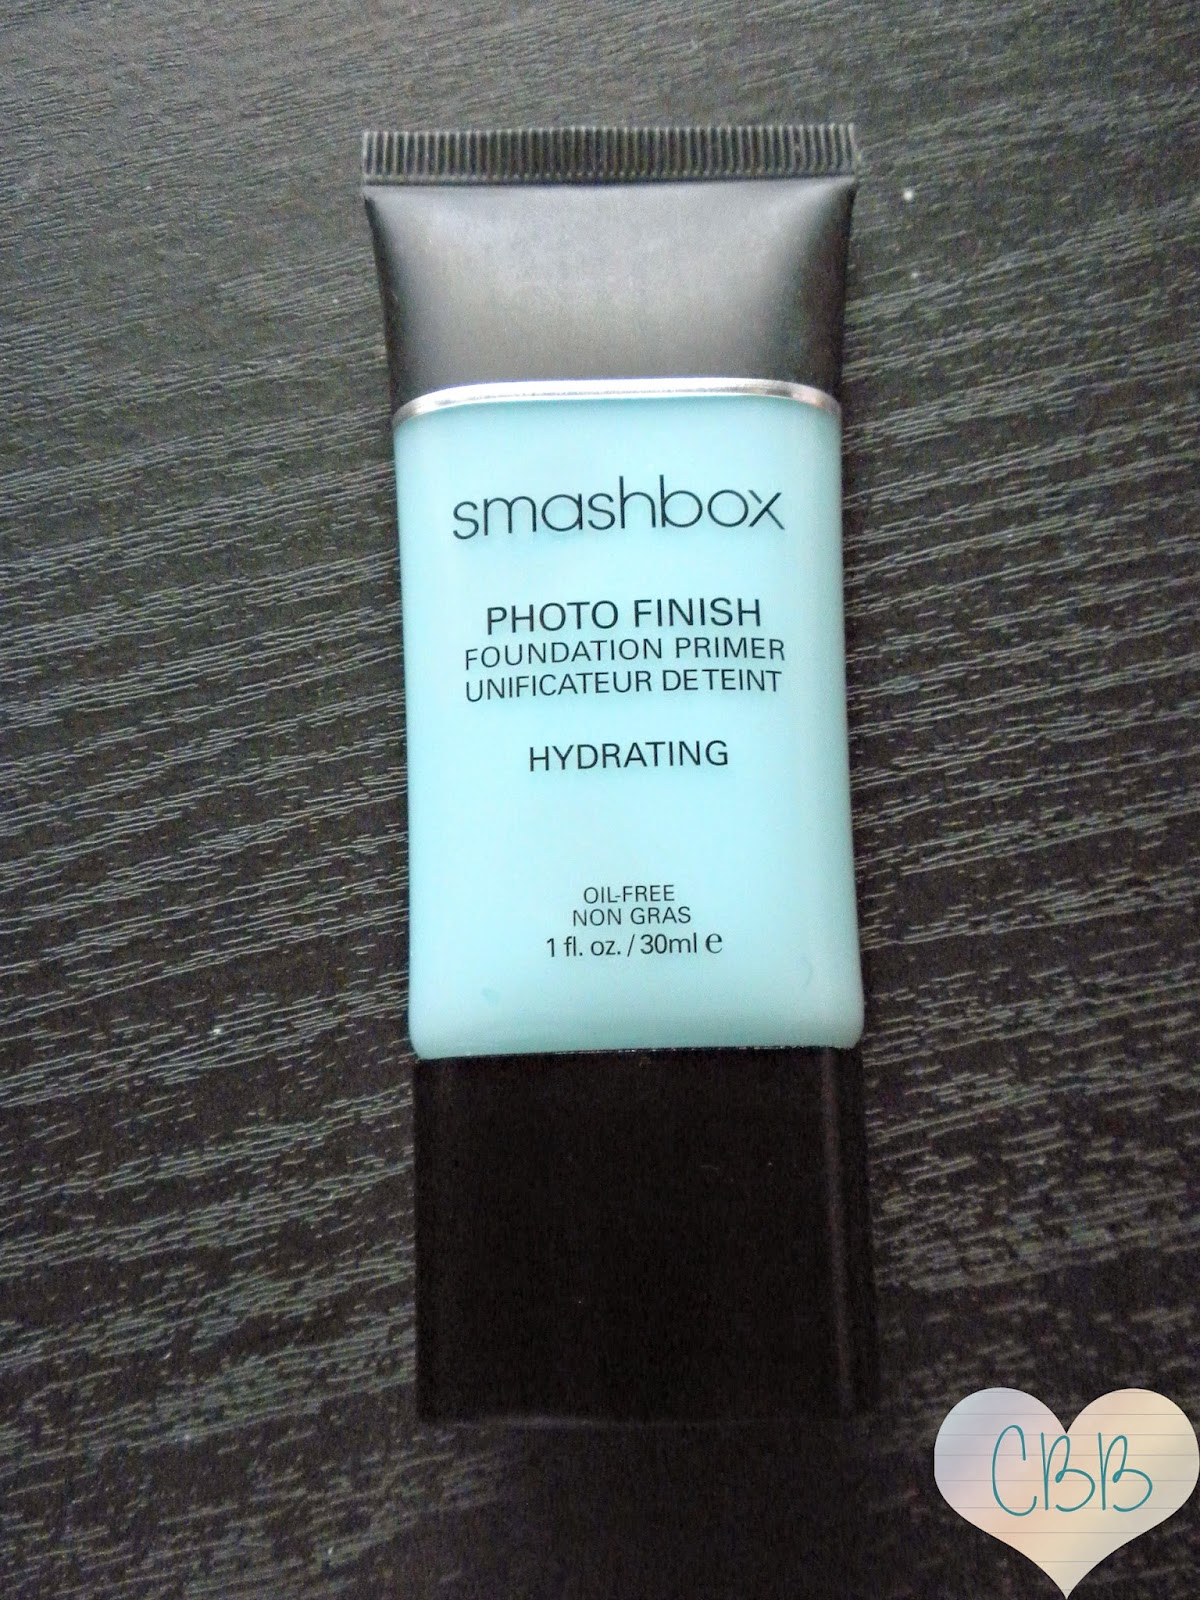 How To: Change Up Your Skincare Routine For Winter - Smashbox Hydrating Primer